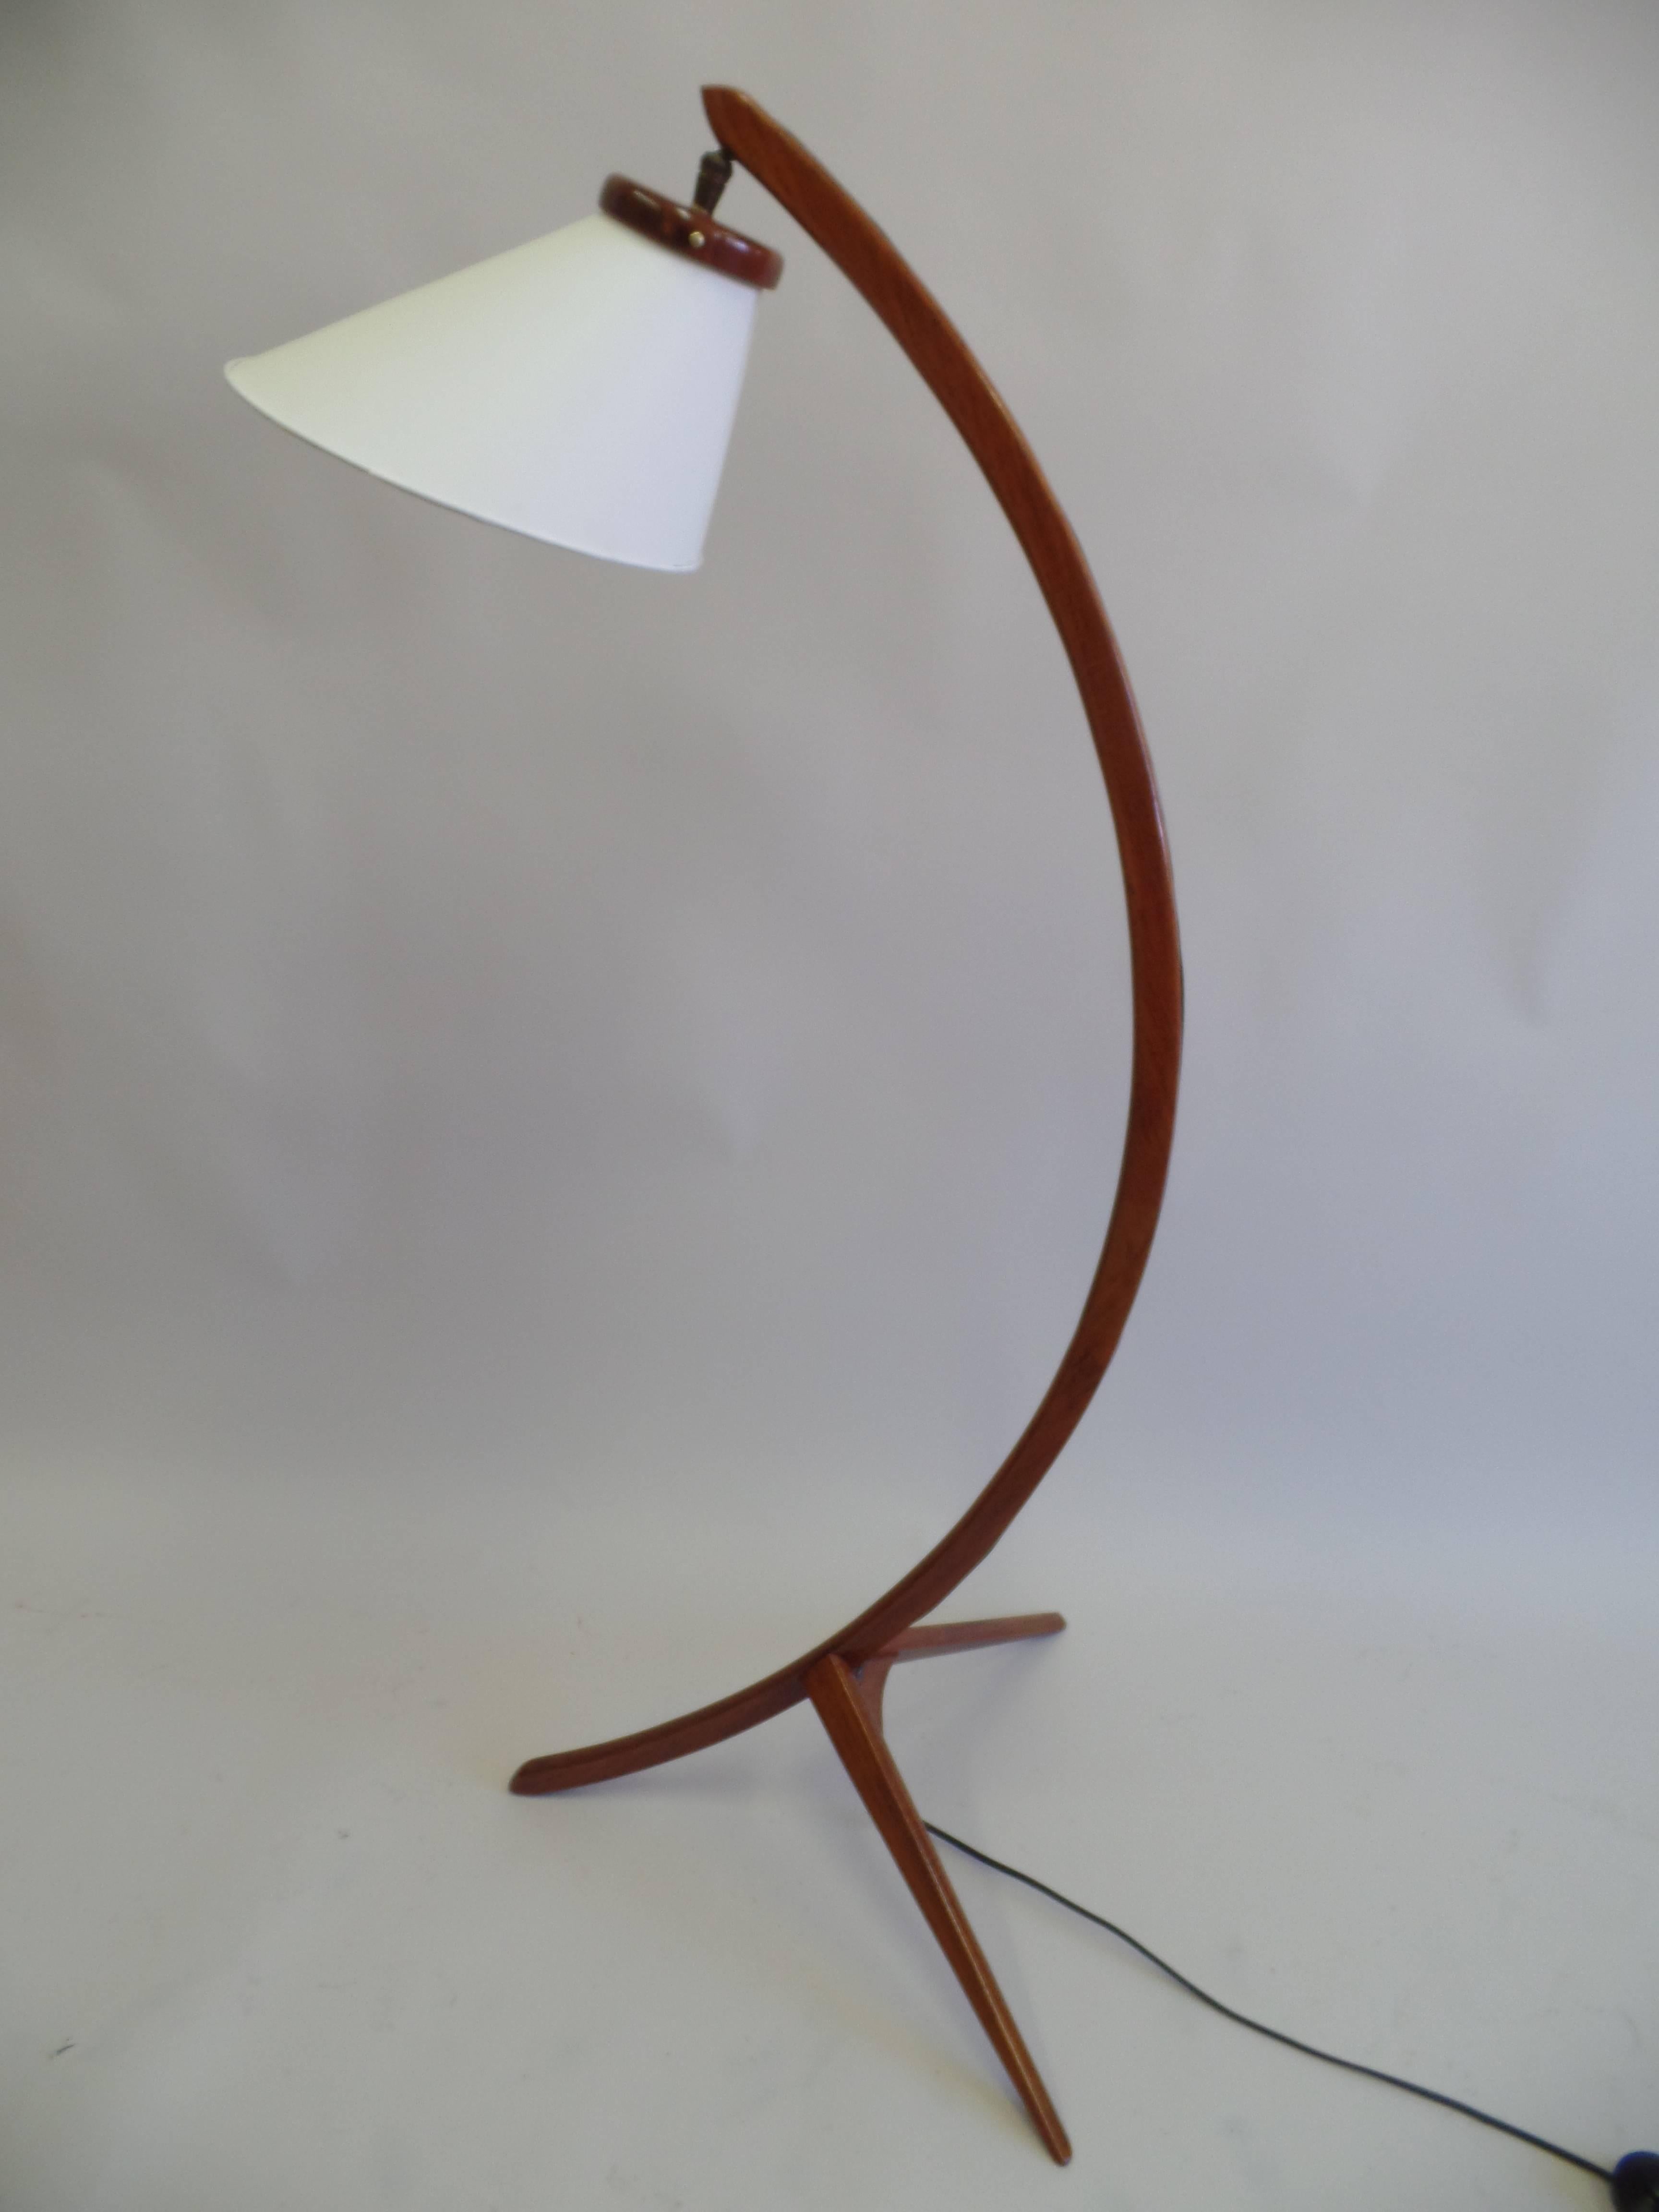 Elegant and stunning pair of Mid-Century Modern standing lamps in solid teak. The curved stem and angled shade are perfectly balanced over a broad tripod base. The iconic form is emblematic of progressive 1950s design.

Sold as a